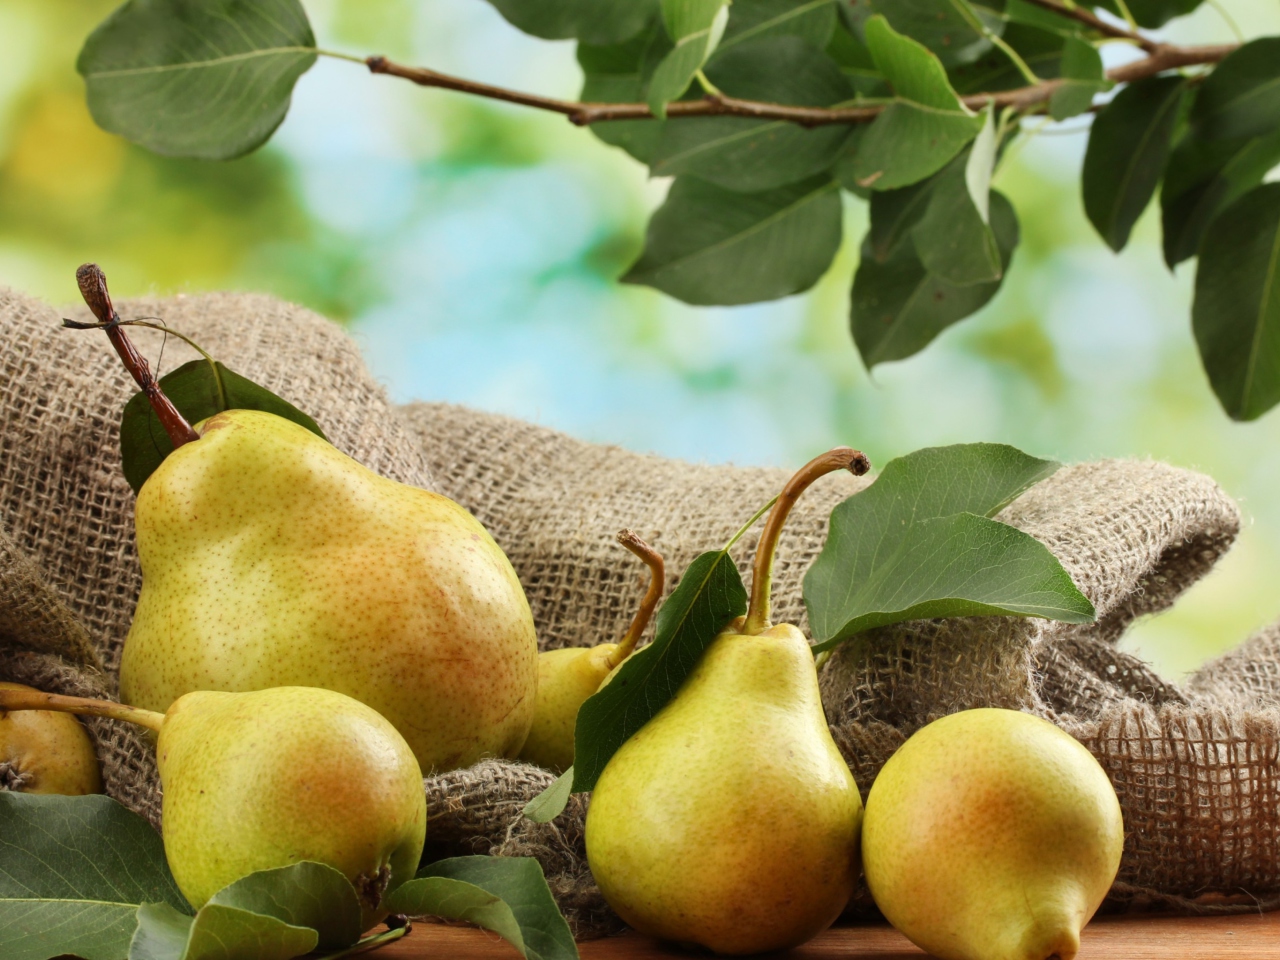 Fresh Pears With Leaves wallpaper 1280x960